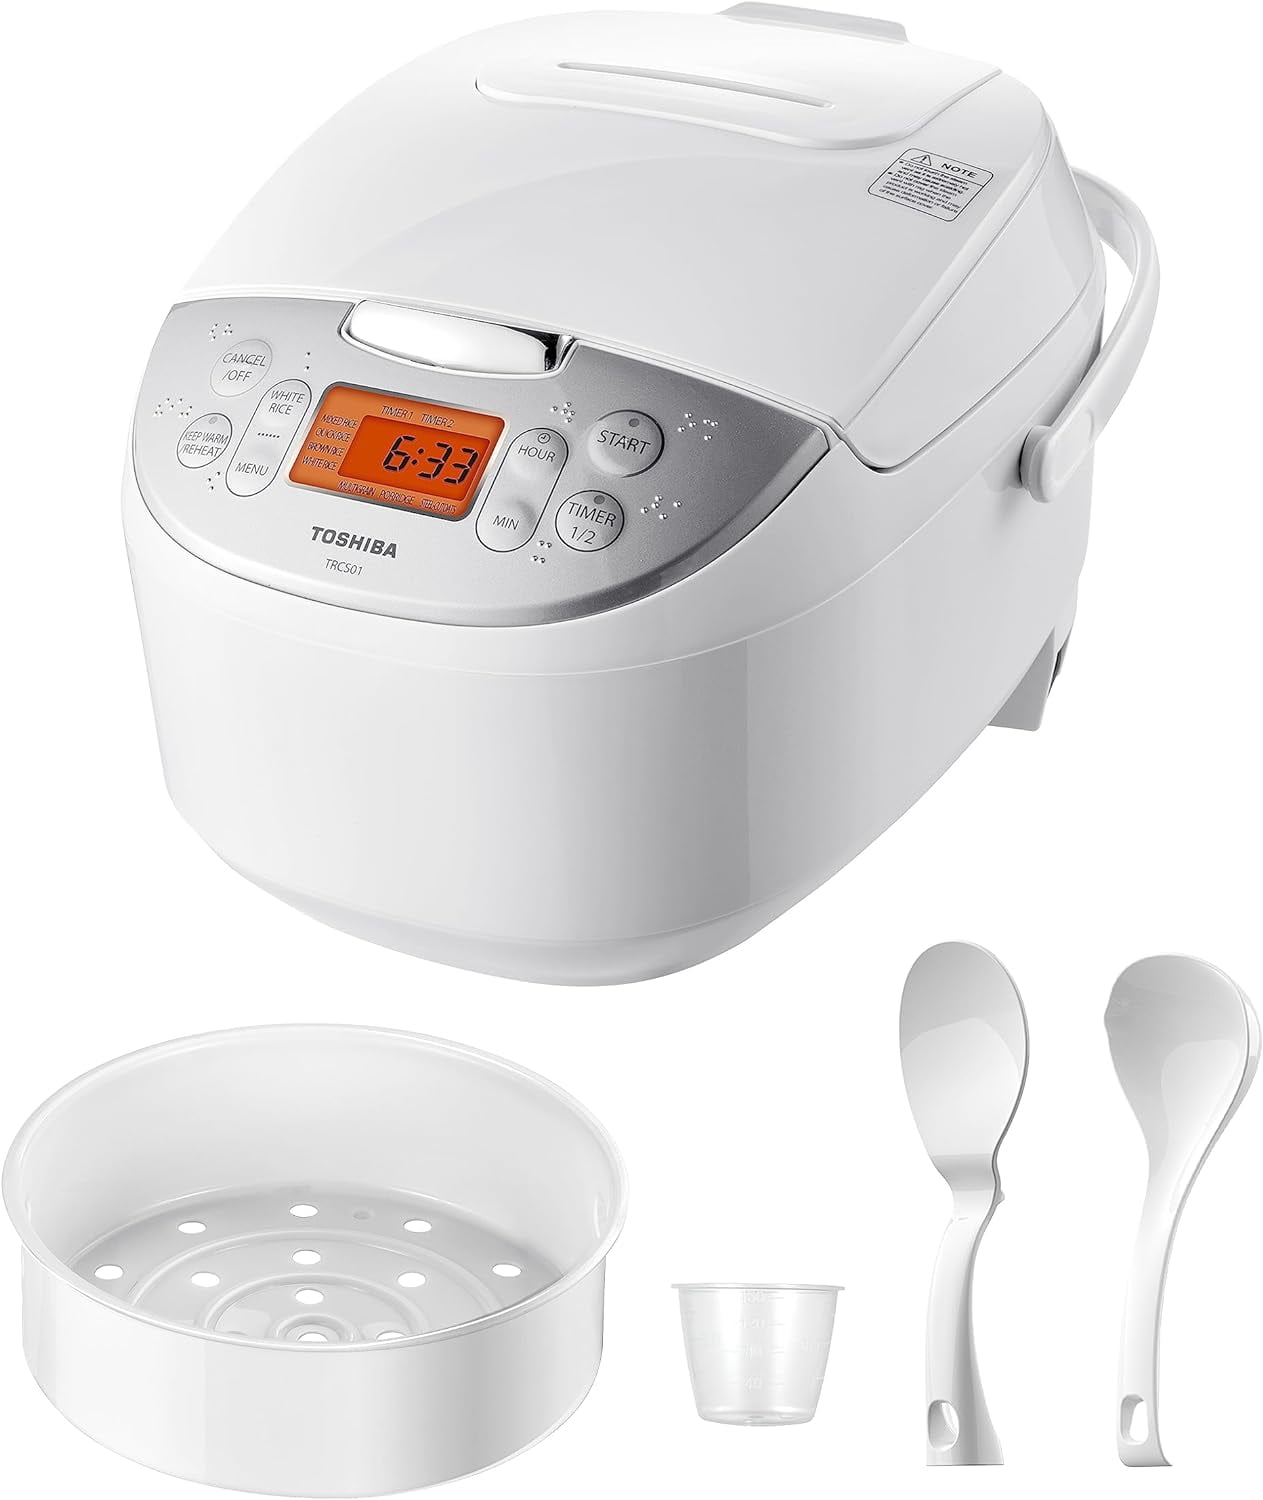 Toshiba Rice Cooker 6 Cups Uncooked (3L) with Fuzzy Logic and One-Touch Cooking White